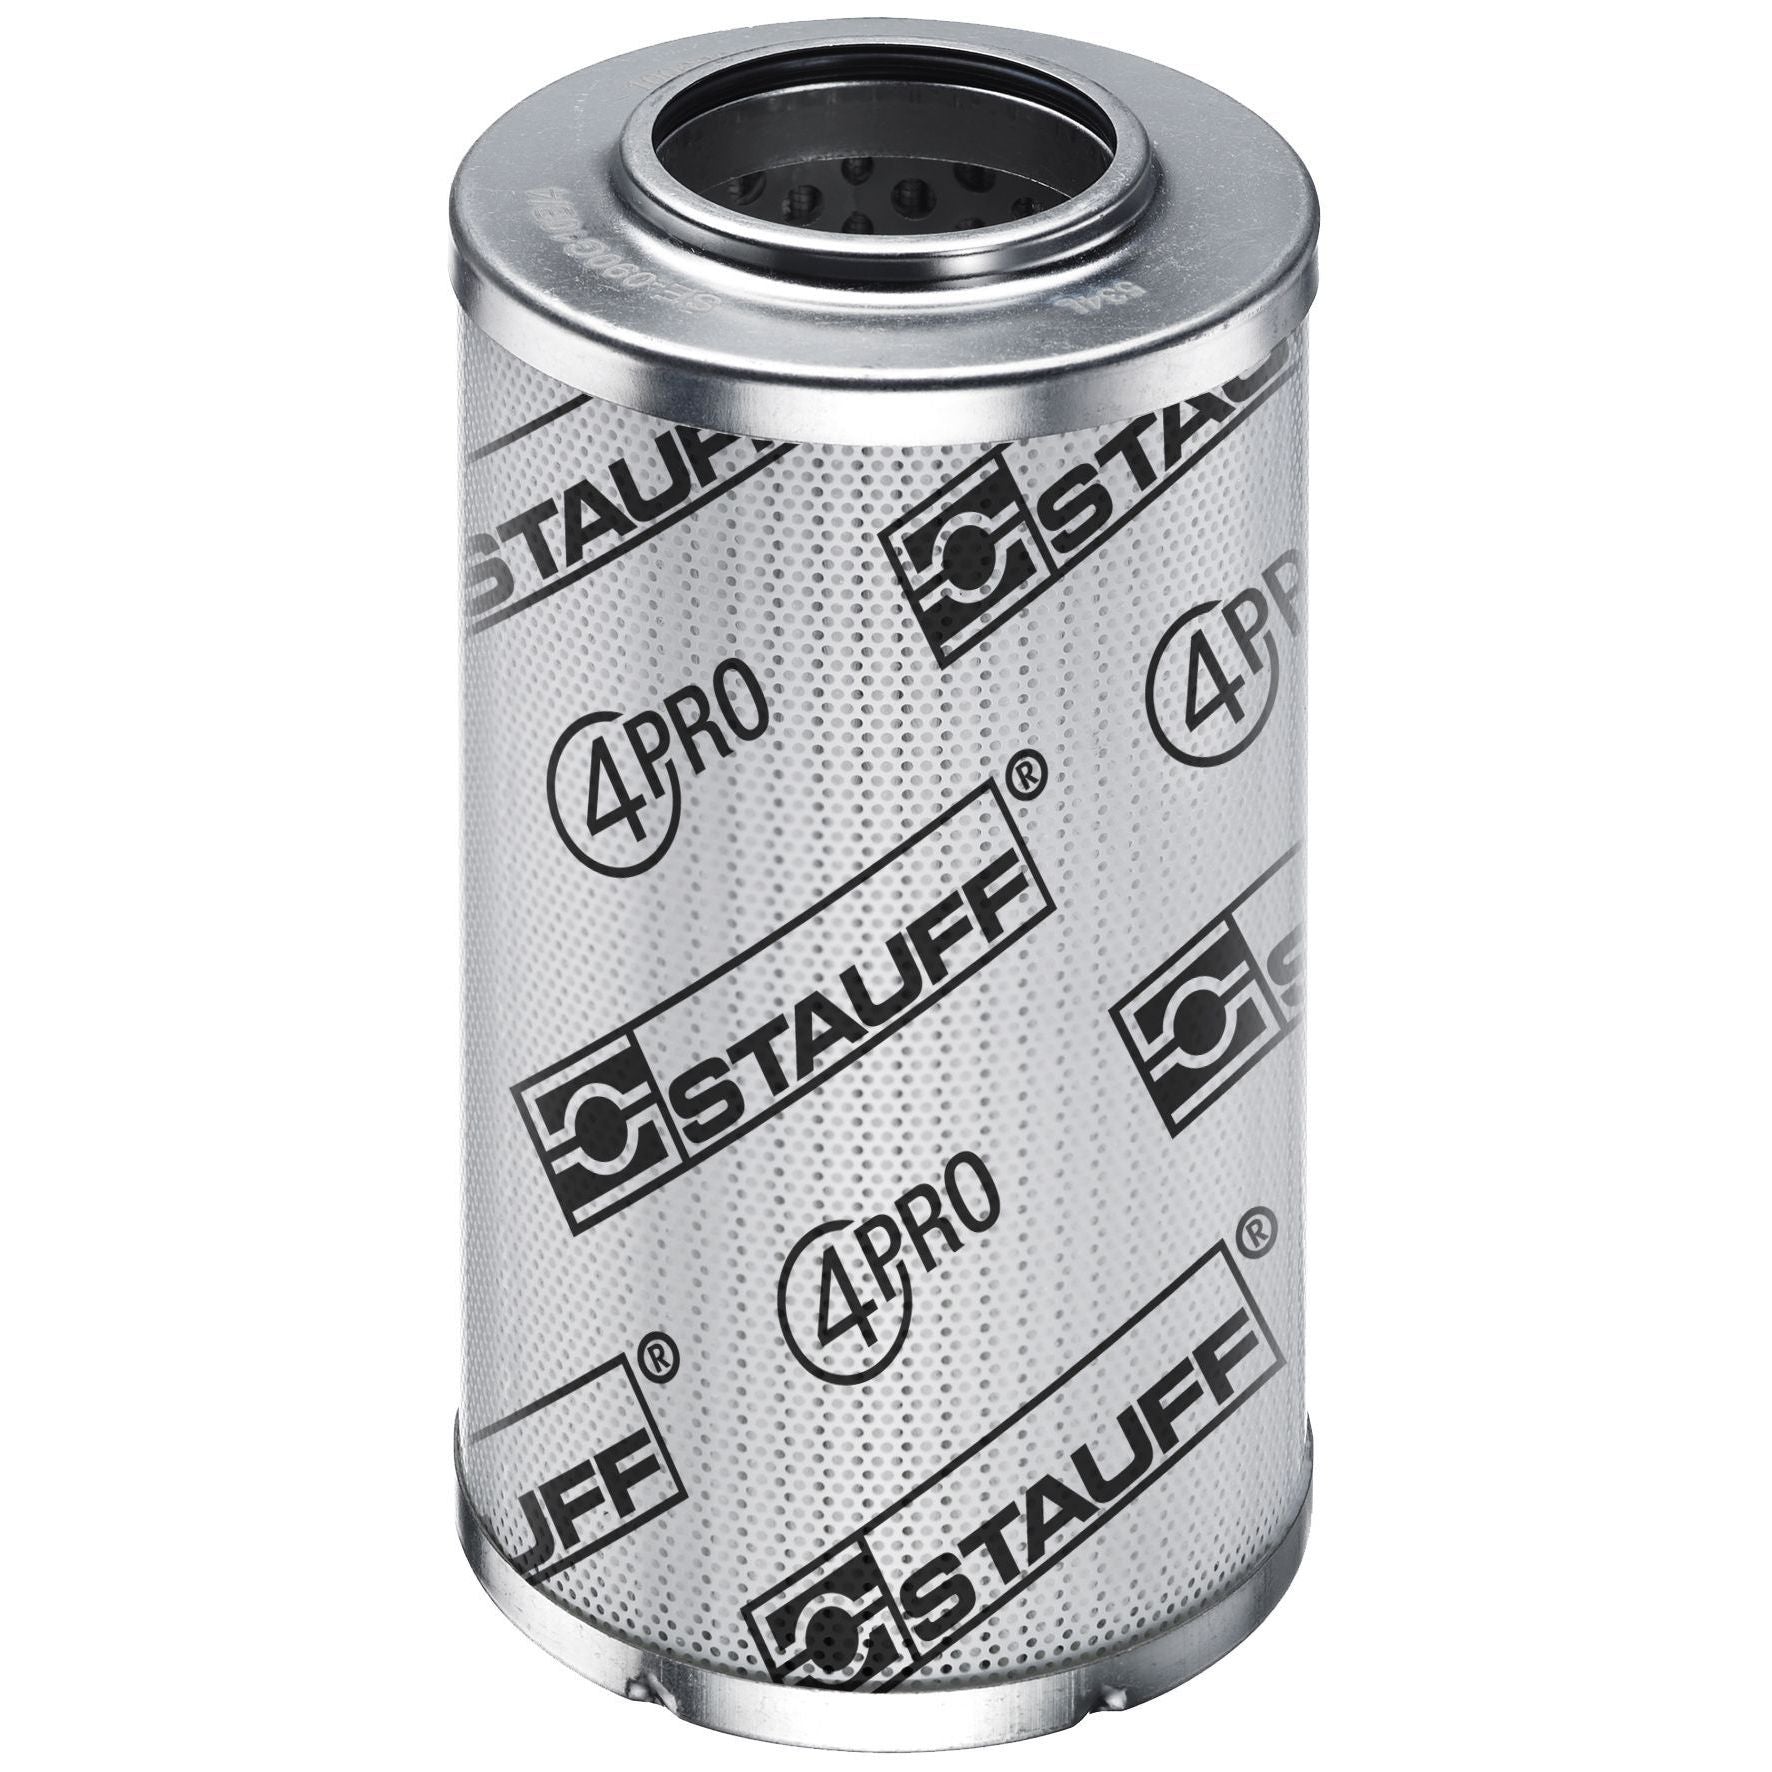 SE-090-G-10-E/4-1 : Stauff SF-090 Series Filter Element, 10 Micron, Synthetic, 363psi Collapse Differential, EPDM Seals